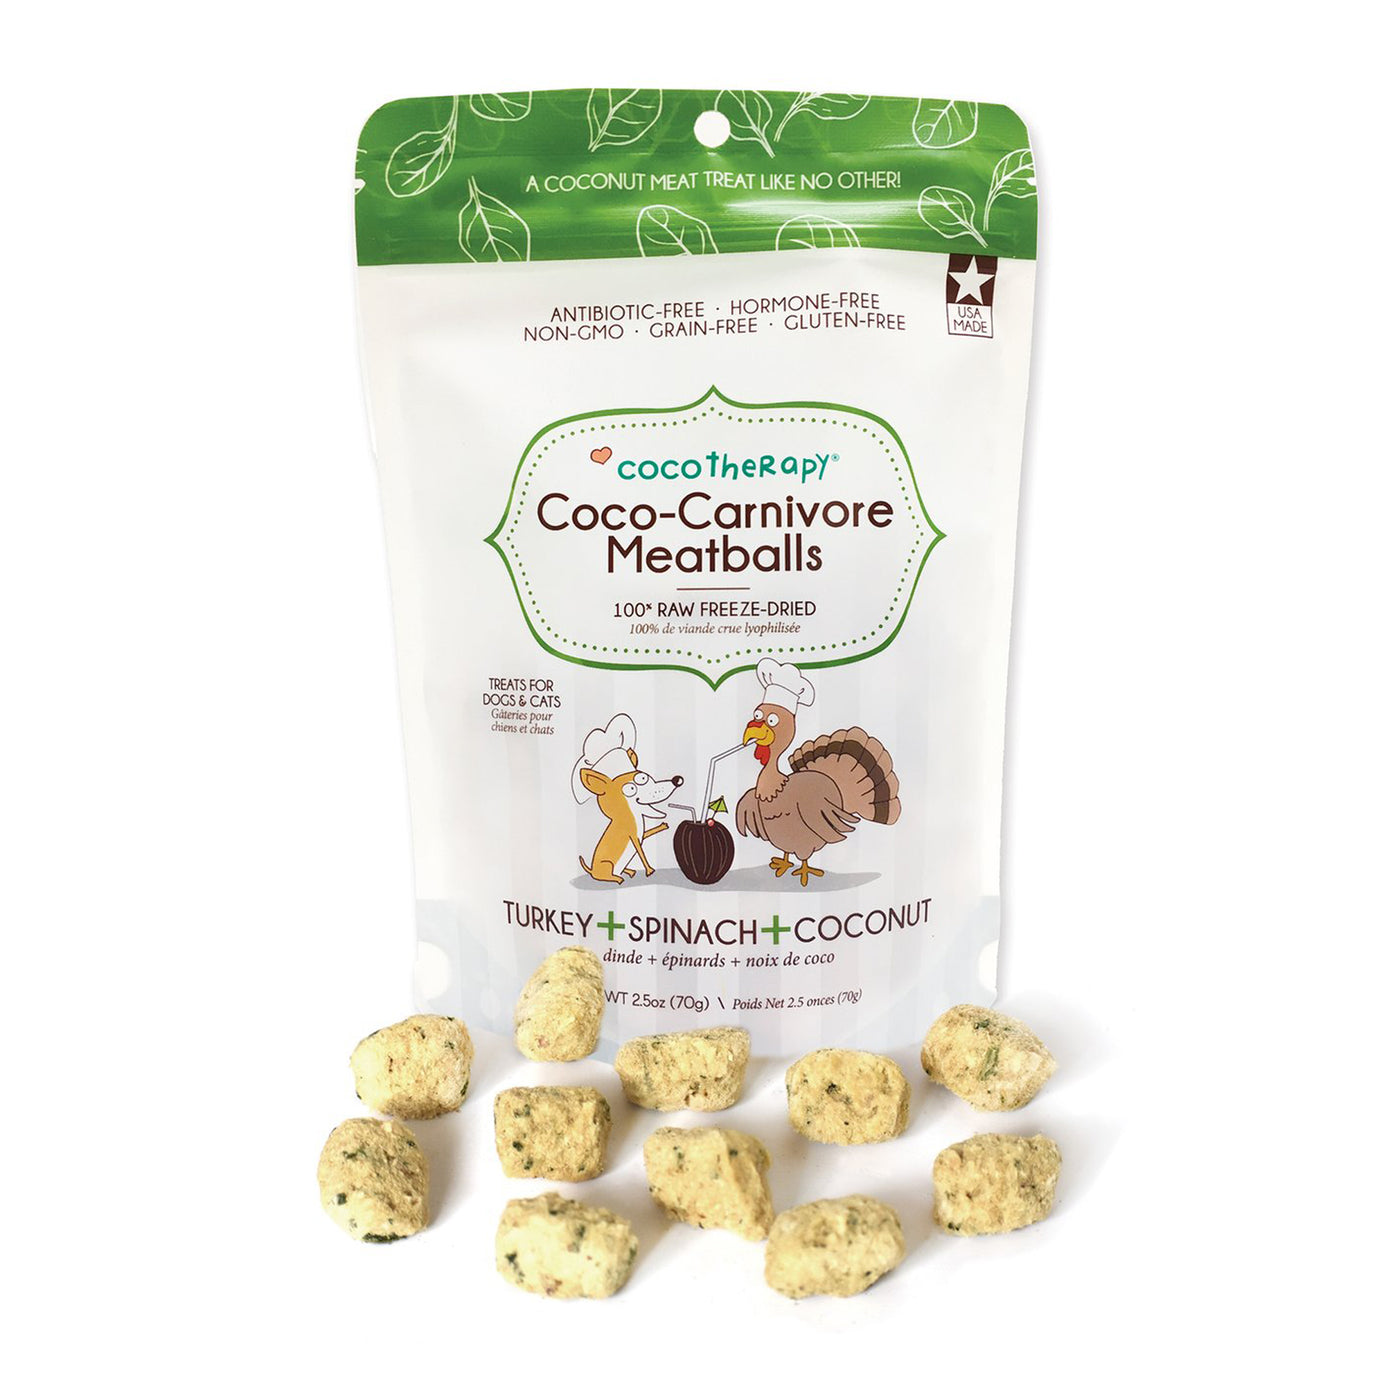 Coco Therapy Turkey Spinach Coconut Coco-Carnivore Meatballs dog treats in pouch with meatballs in front